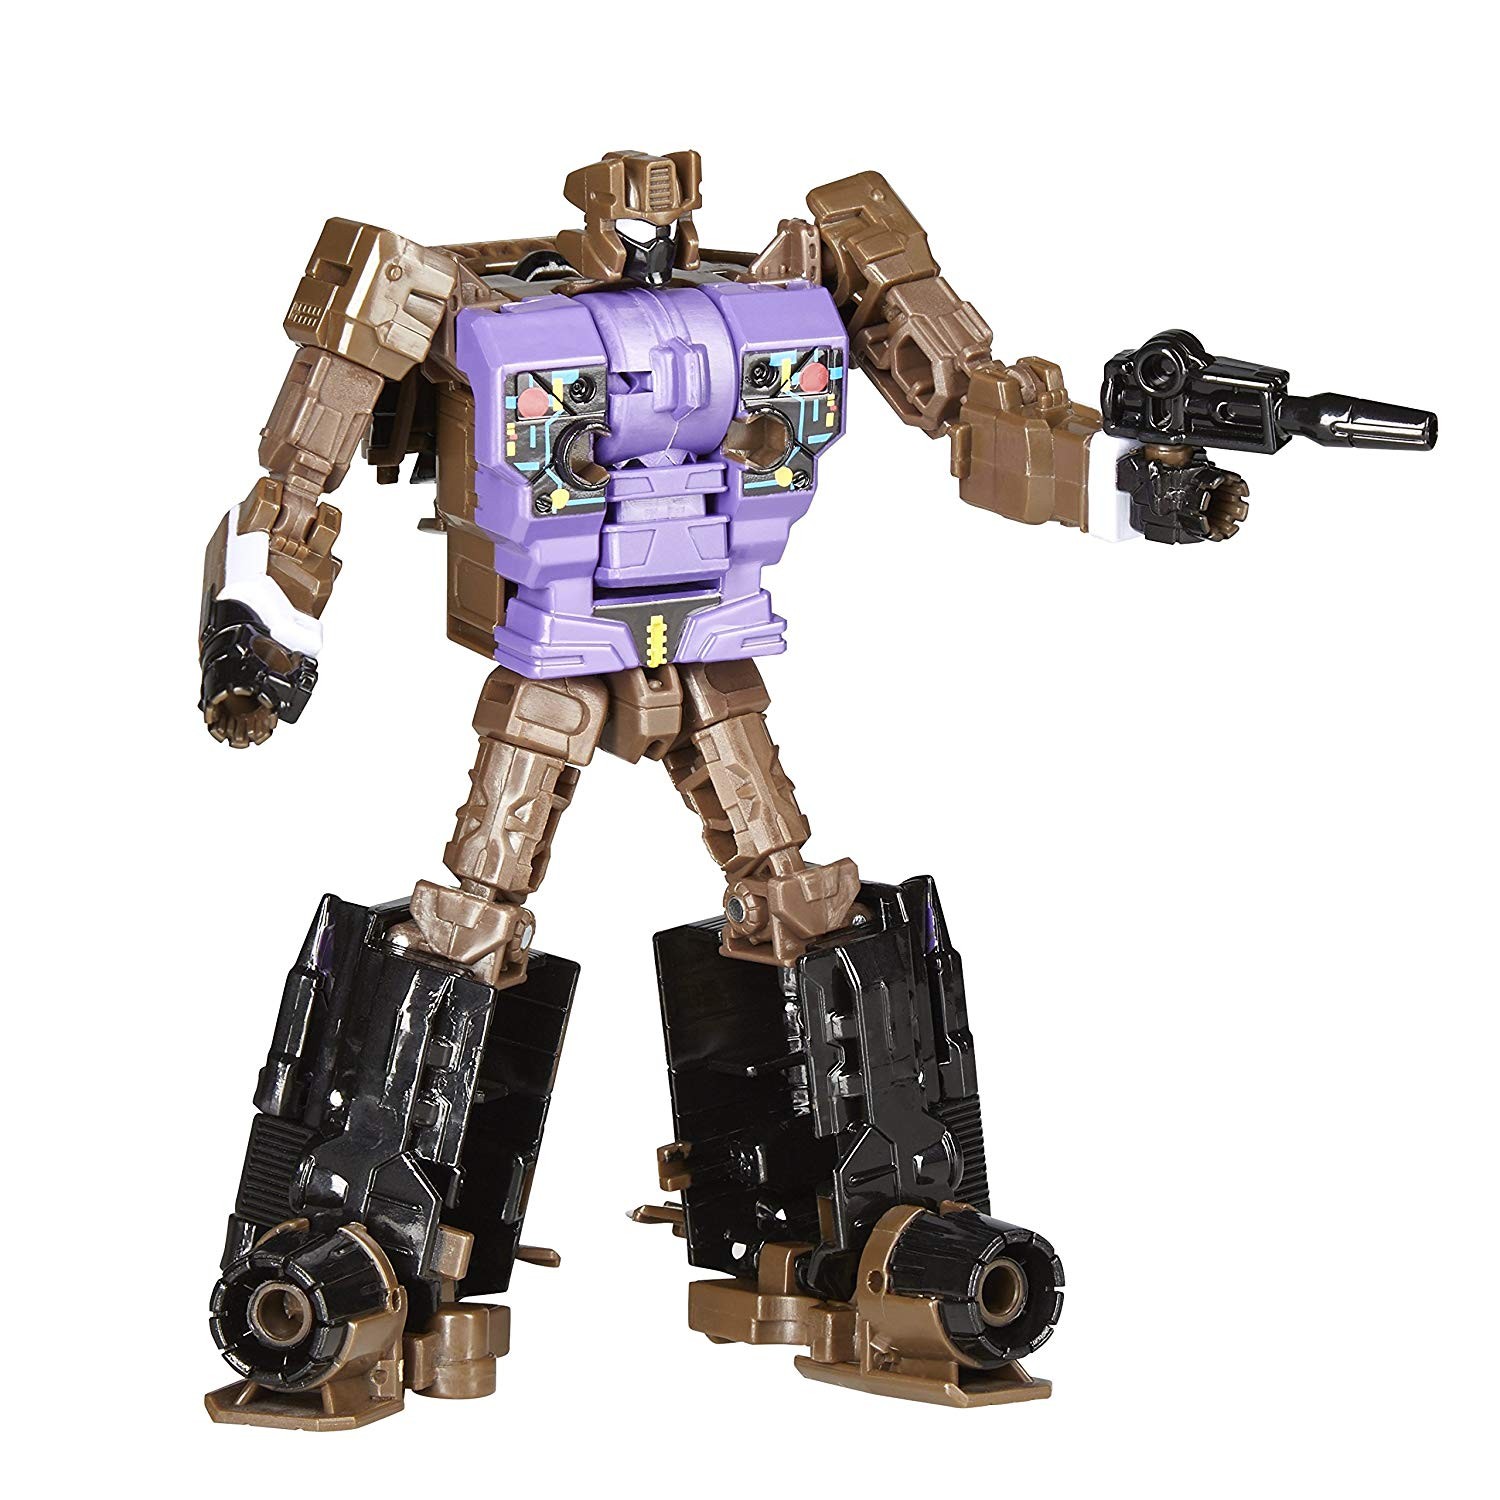 Transformers News: Transformers: Prime Wars Amazon Exclusive Blast Off with Megatronus Available for Pre-Order